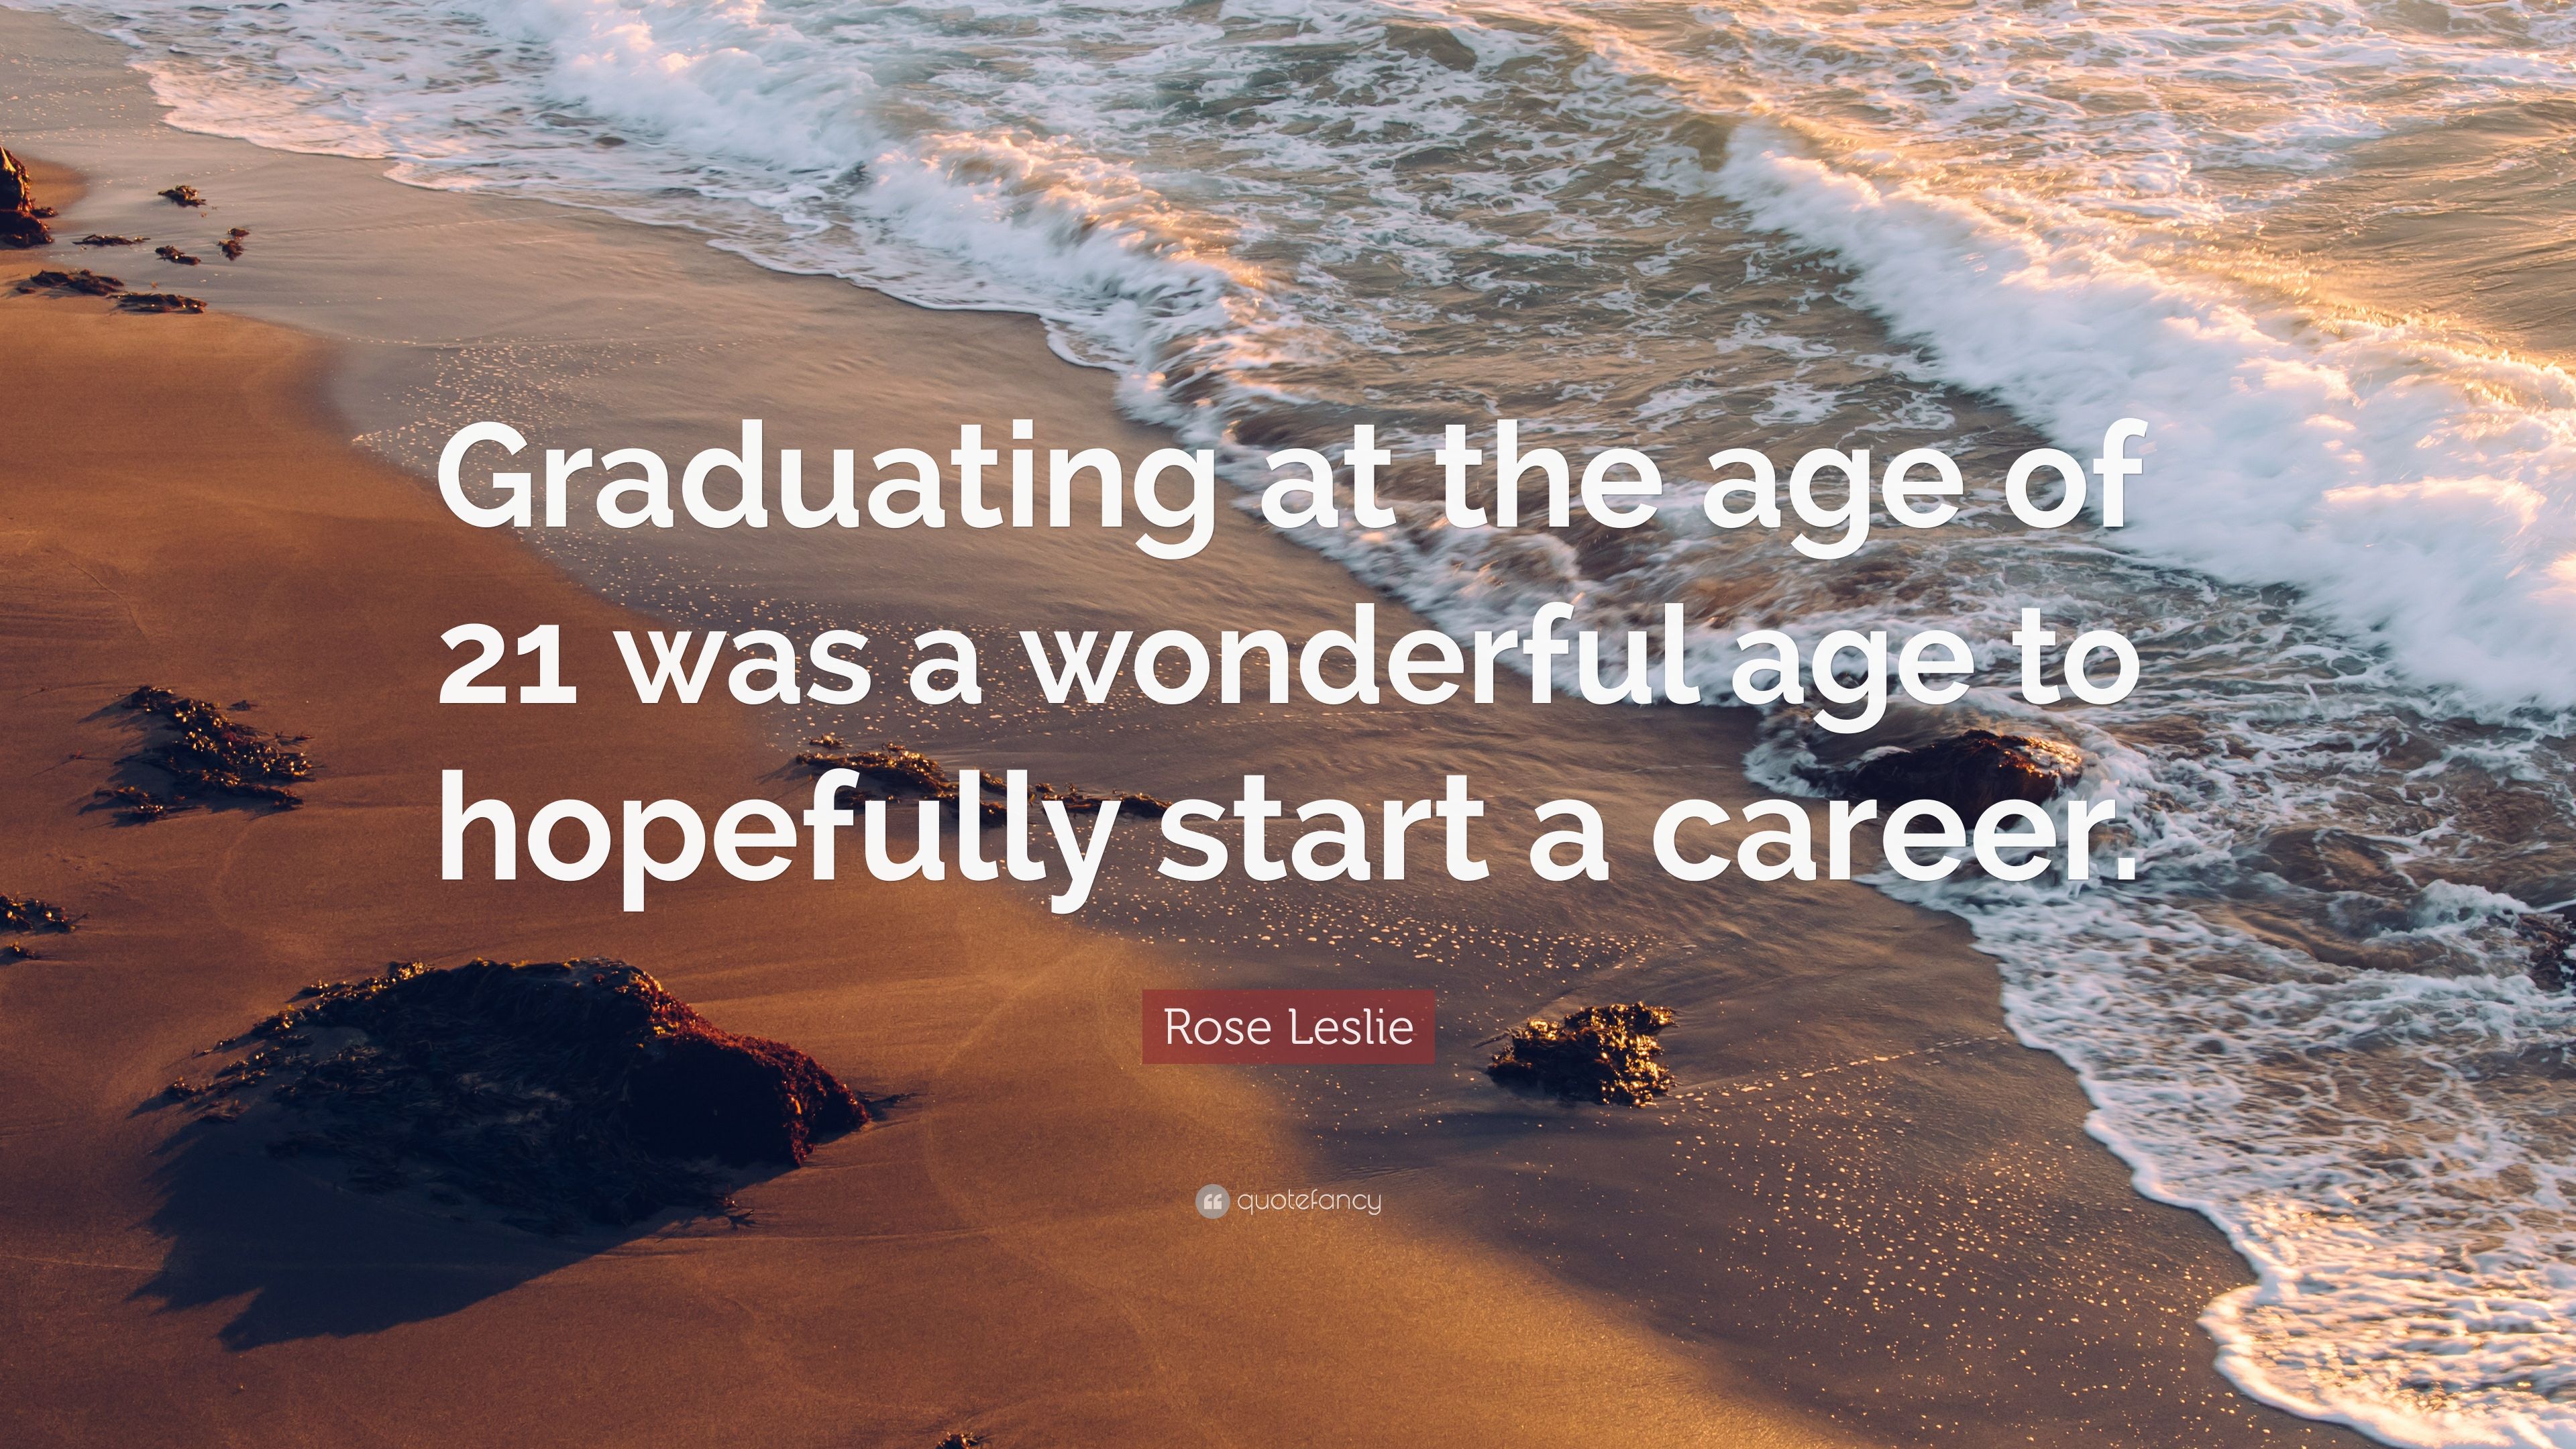 Rose Leslie Quote: “Graduating at the age of 21 was a wonderful age